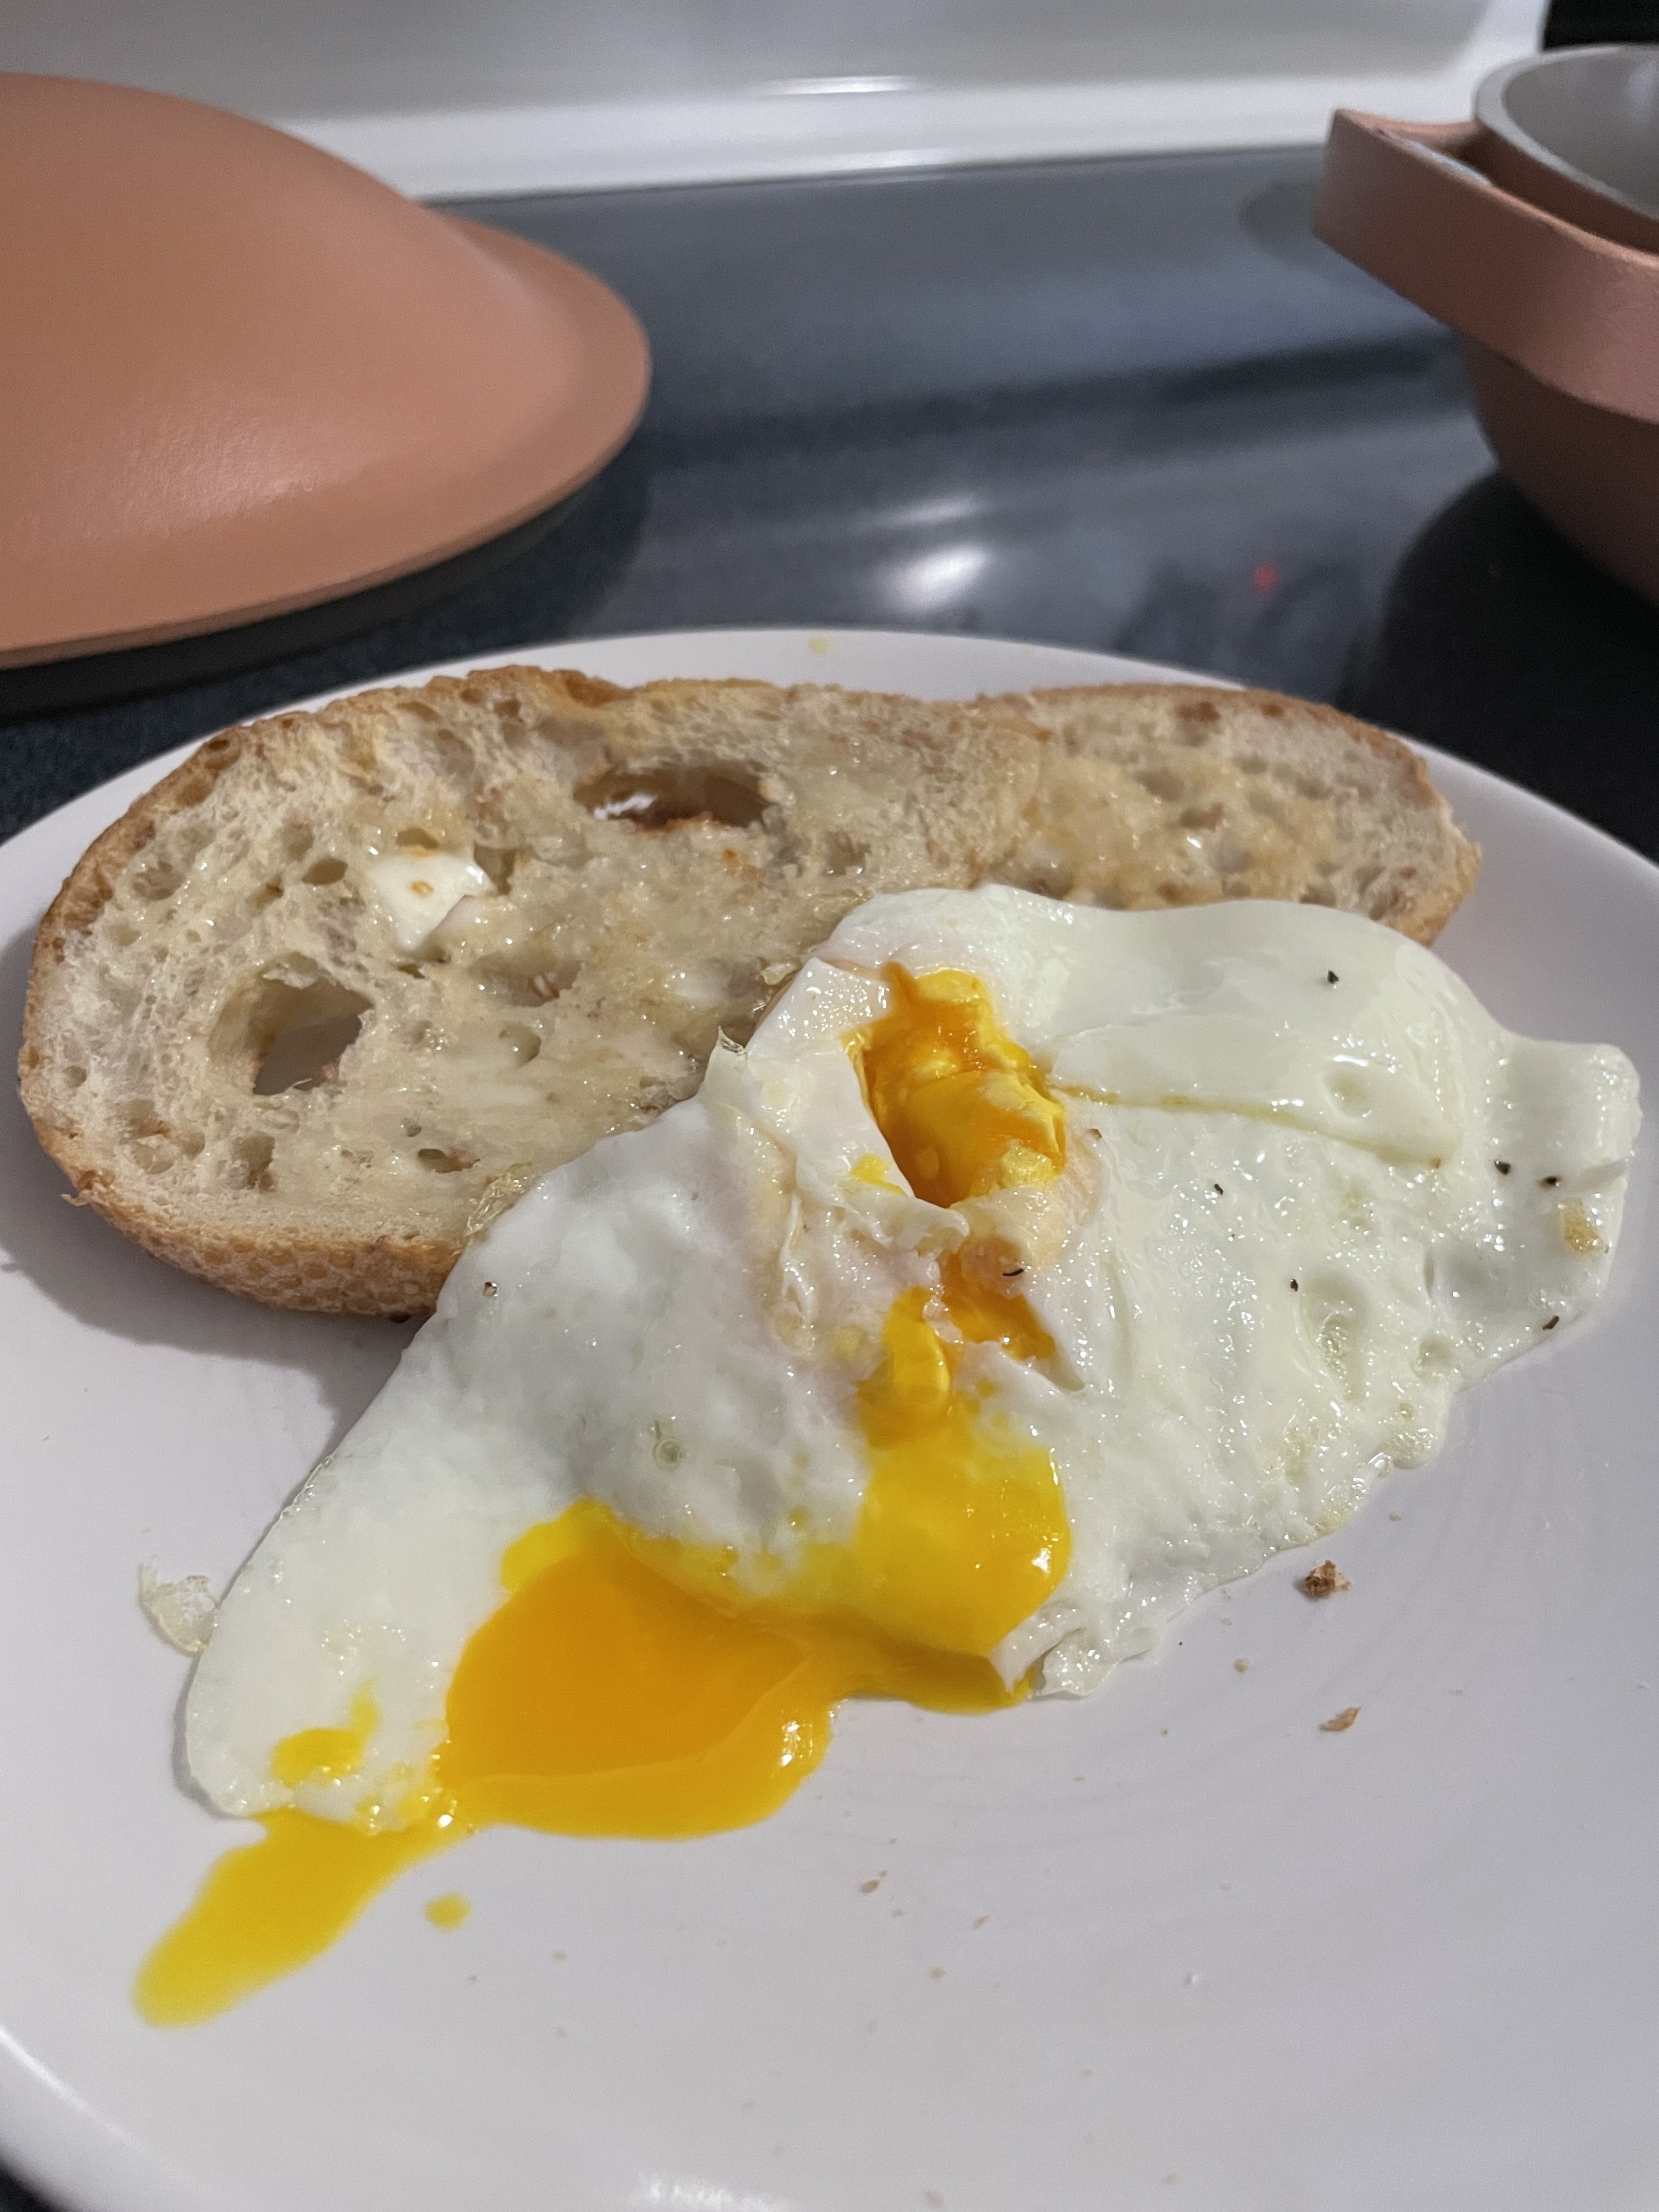 Runny over-easy egg on a plate with bread